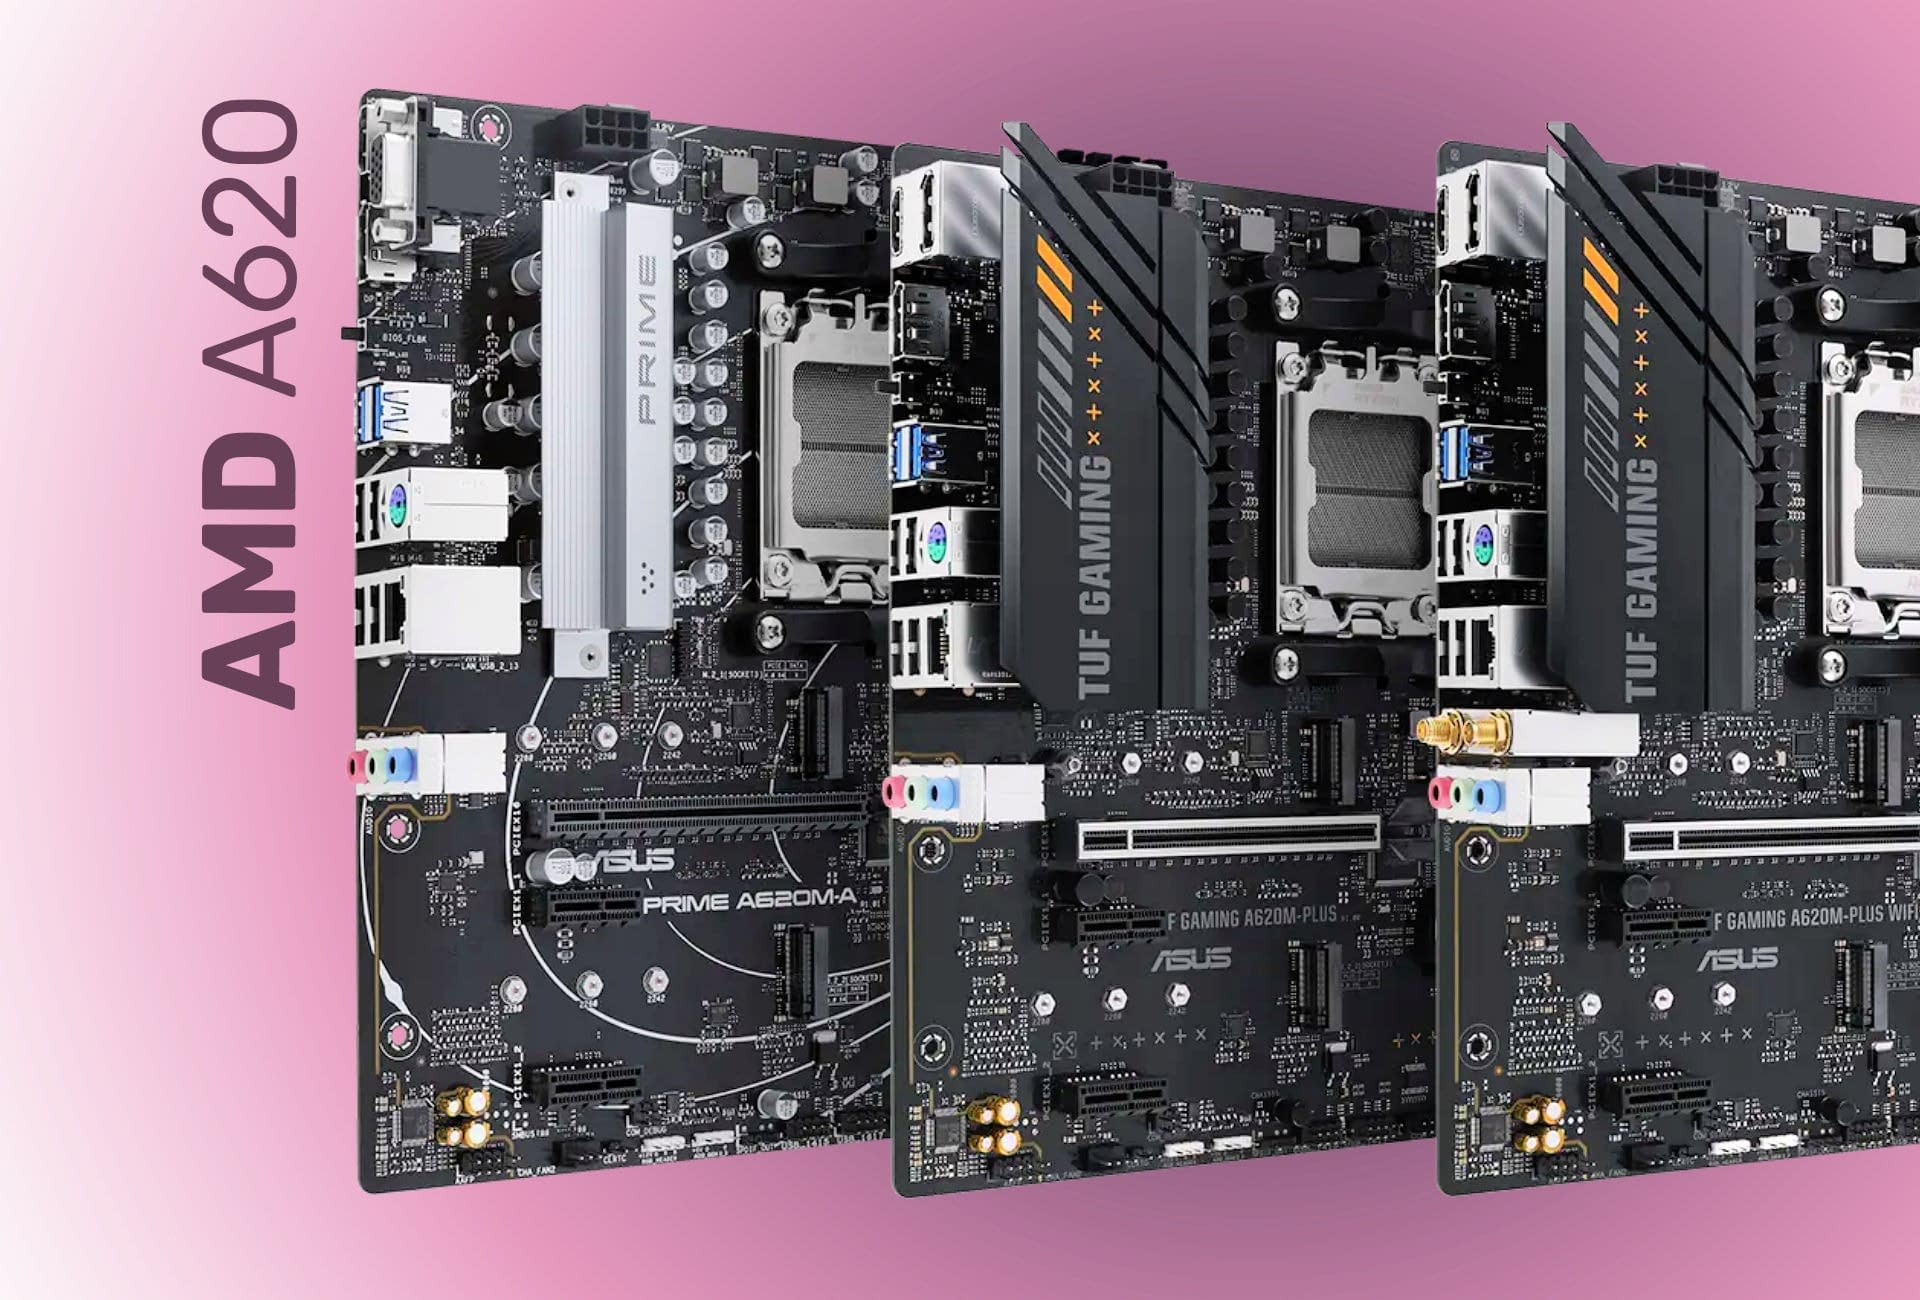 ASUS announced TUF Gaming and Prime series AMD A620 motherboards